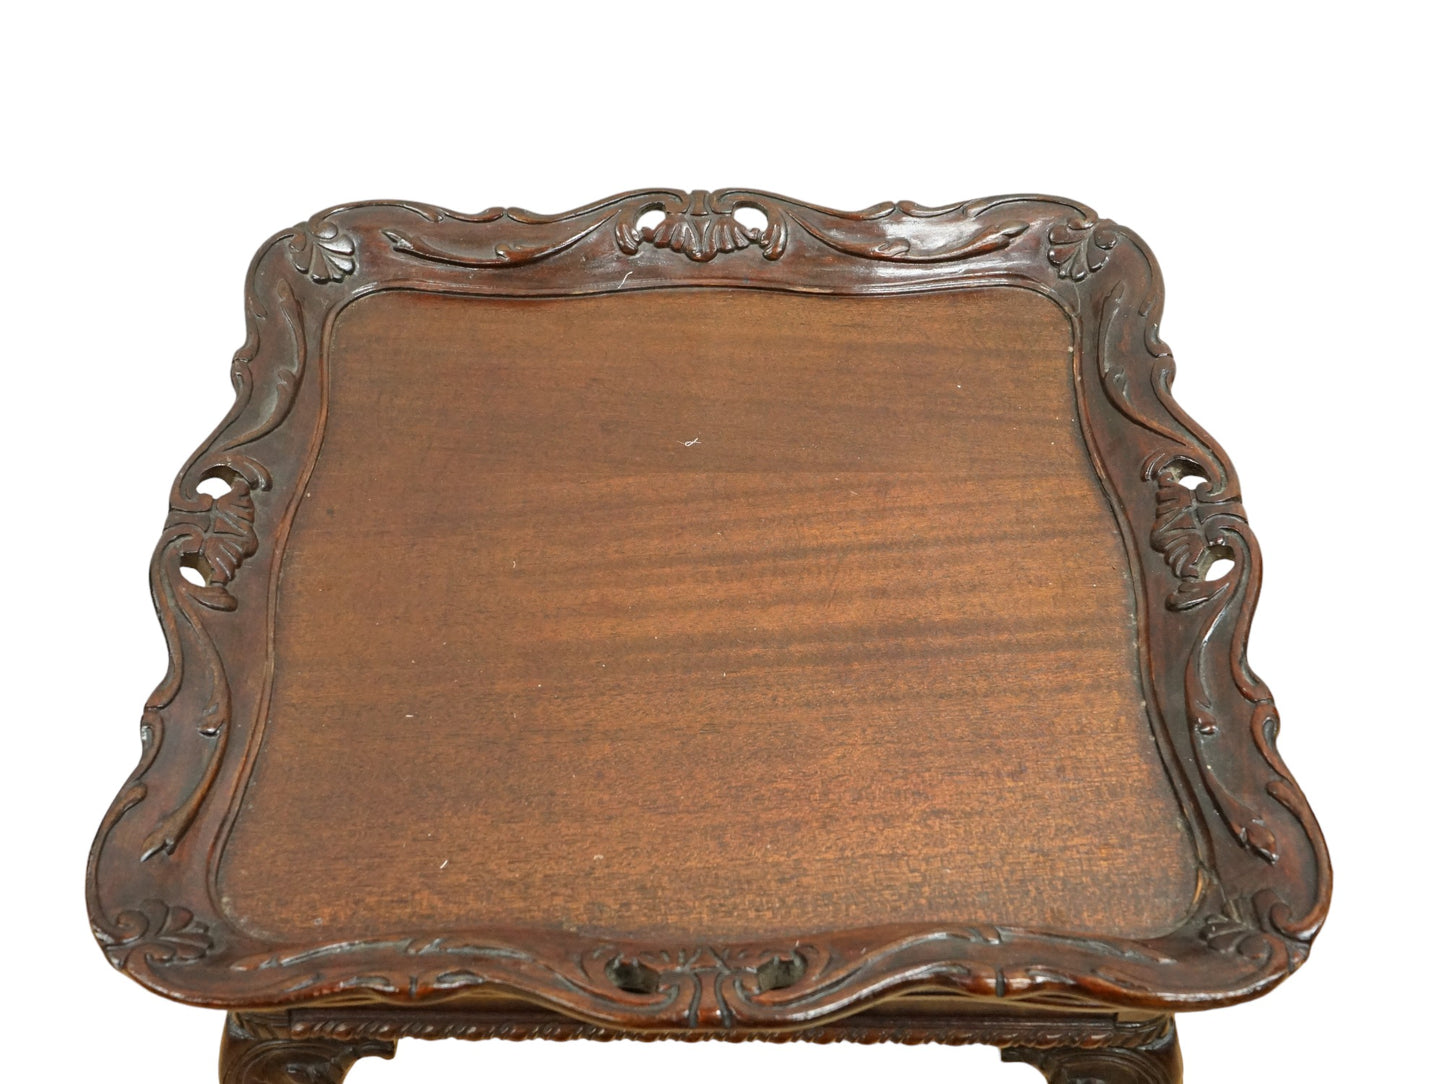 A 20th Century George Iii Style Side Table